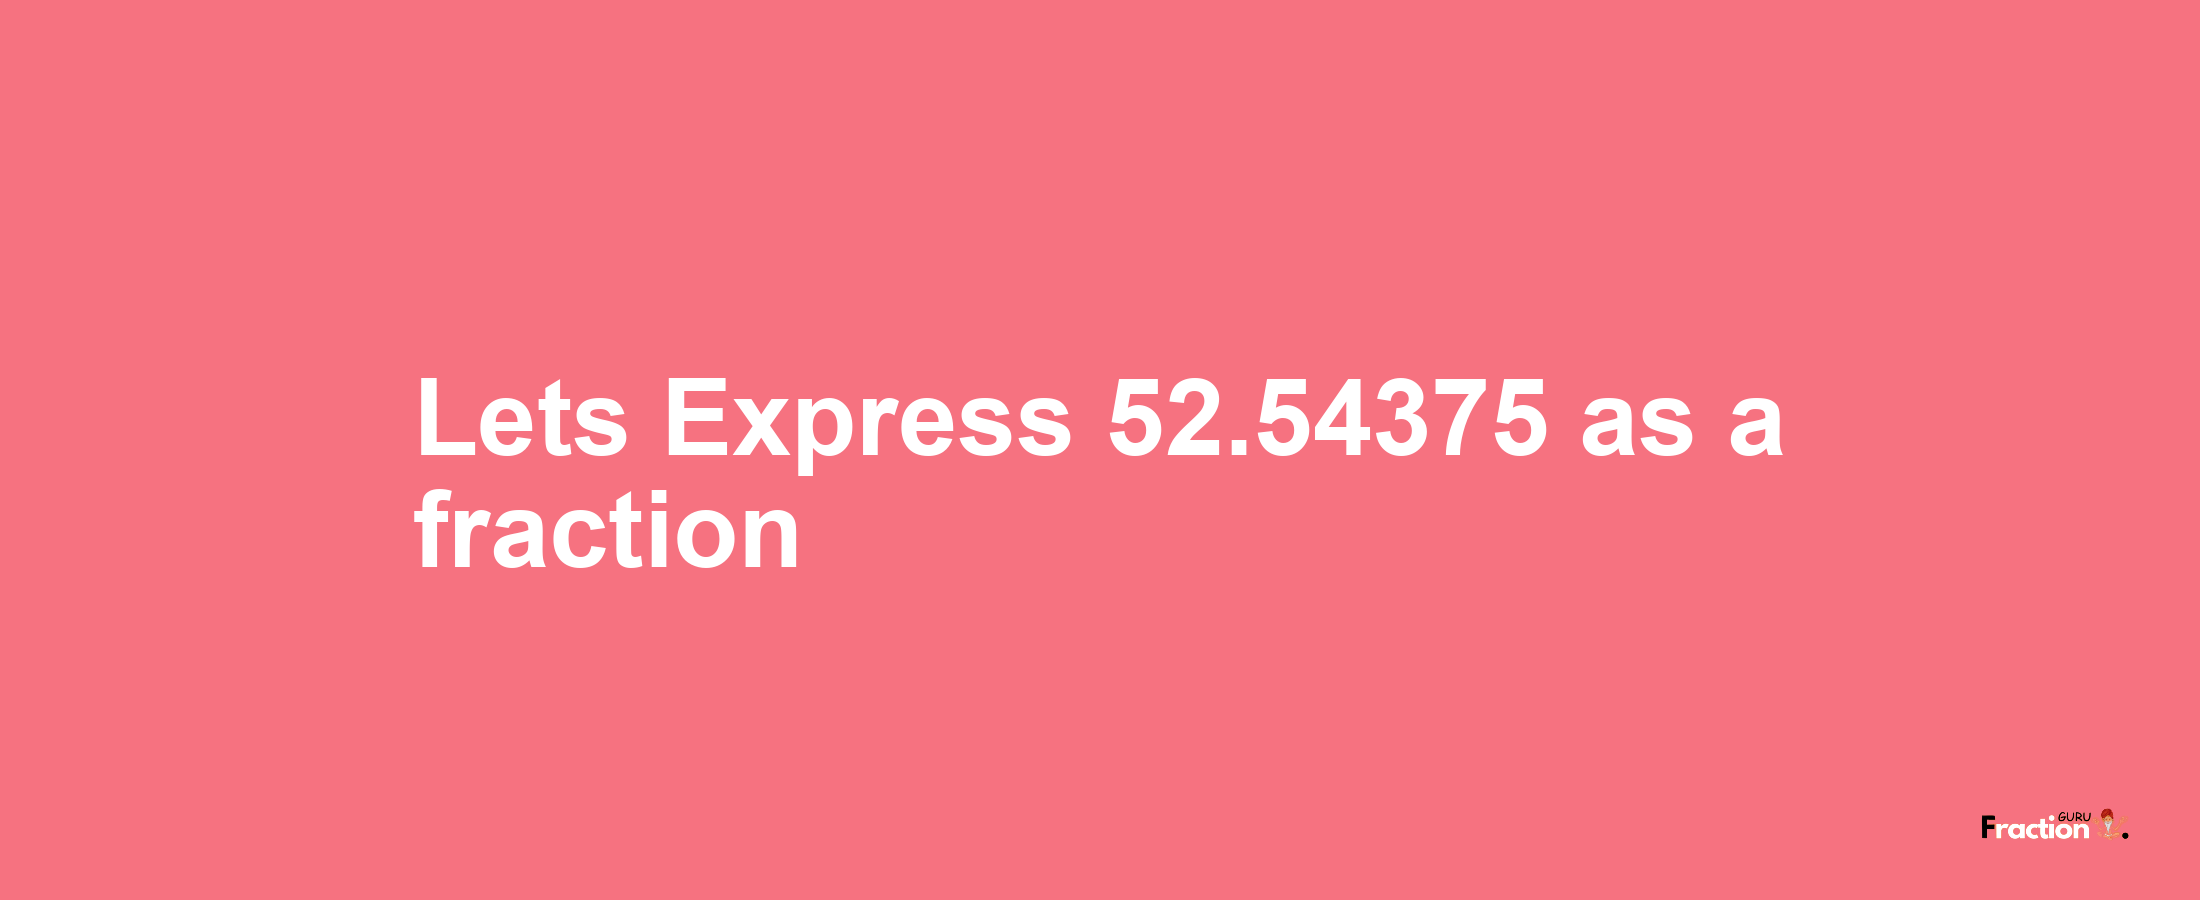 Lets Express 52.54375 as afraction